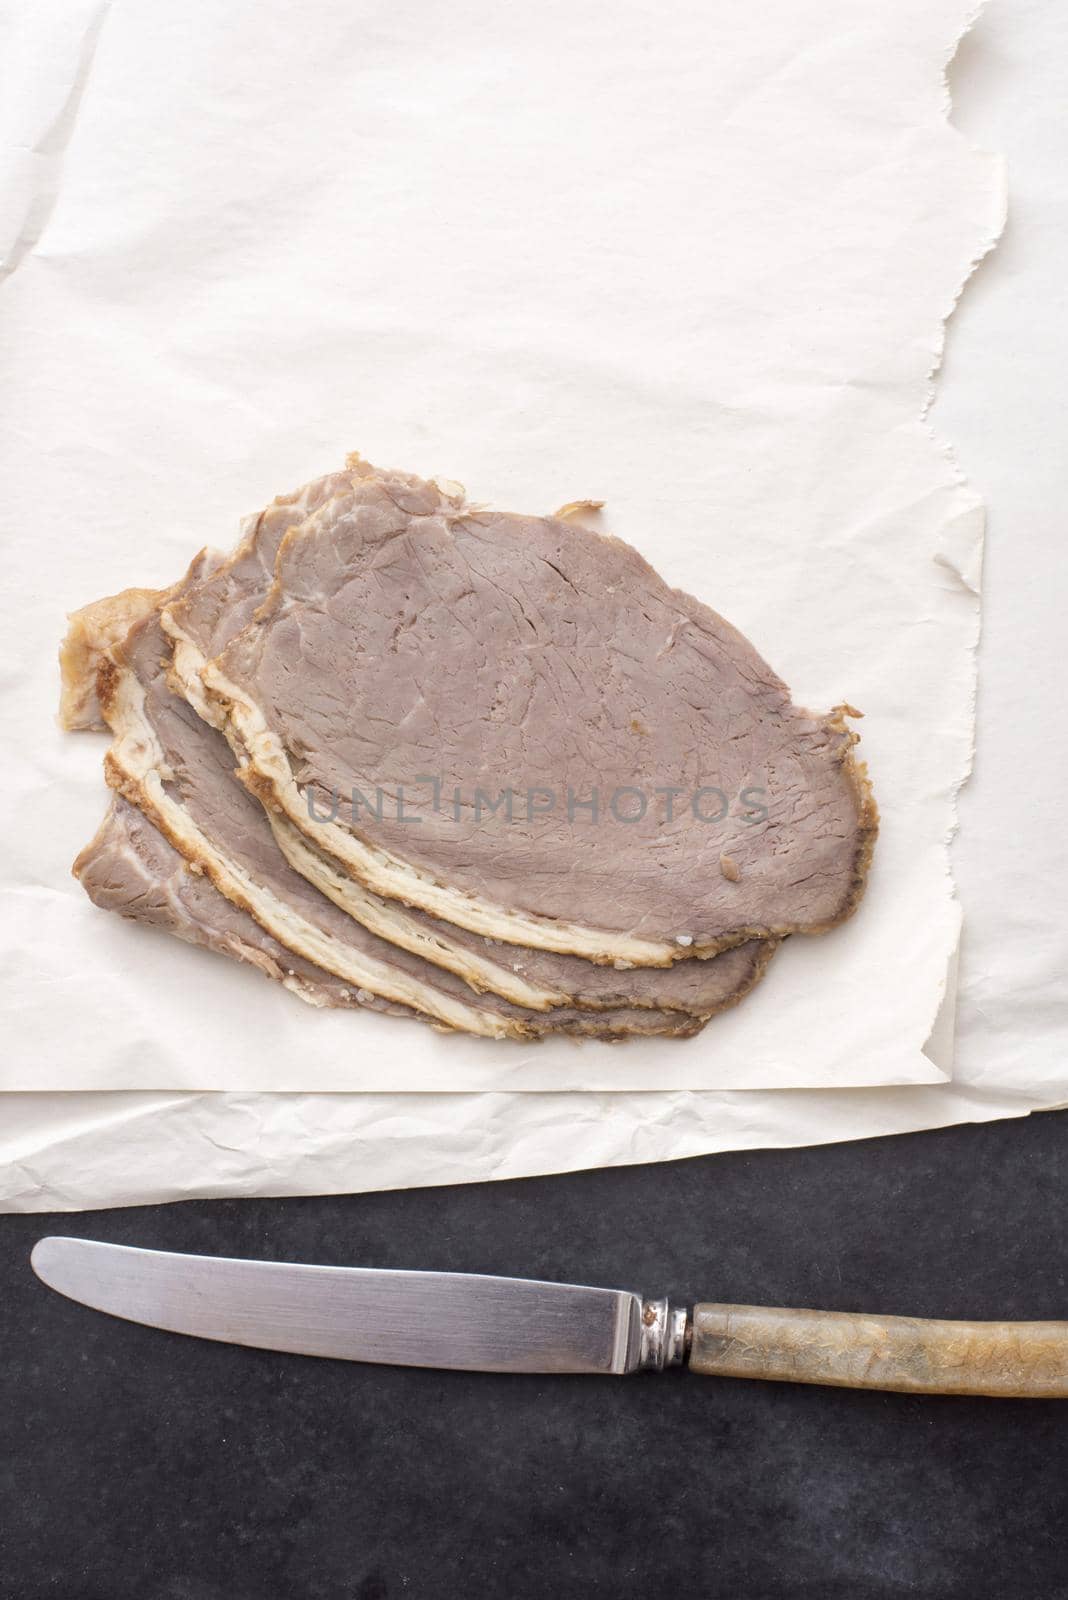 A close up of sliced roast beef and knife on butchers paper.